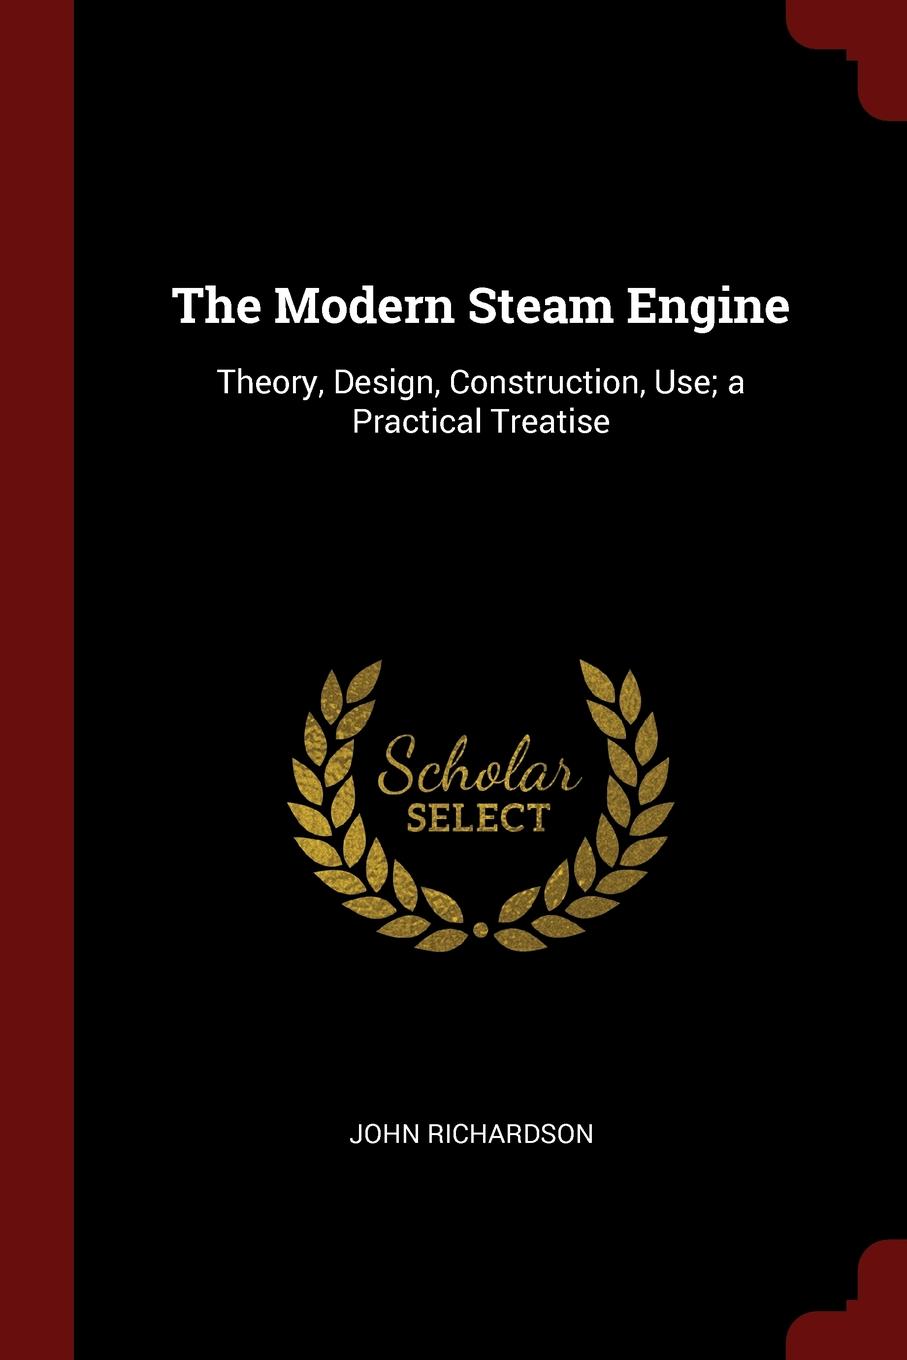 The Modern Steam Engine. Theory, Design, Construction, Use; a Practical Treatise